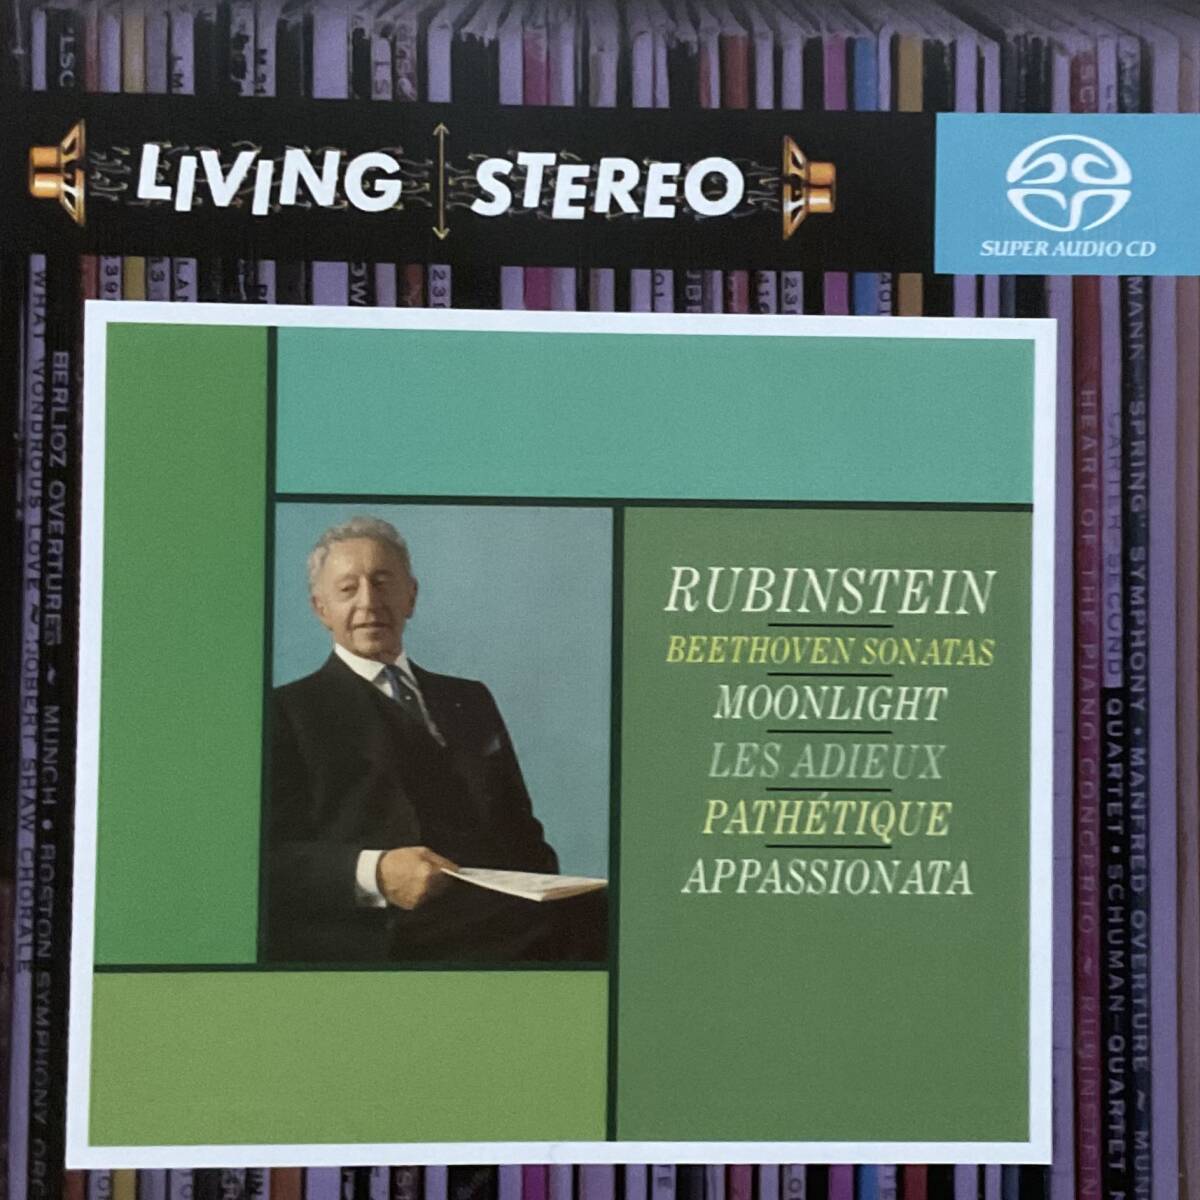 LIVING STEREO SACD: beige to-ven~ piano. sonata compilation no. 8 number [..] no. 10 four number [ month light ] no. 23 number [..] no. 26 number [. another ], Roo bin shu Thai n(p)